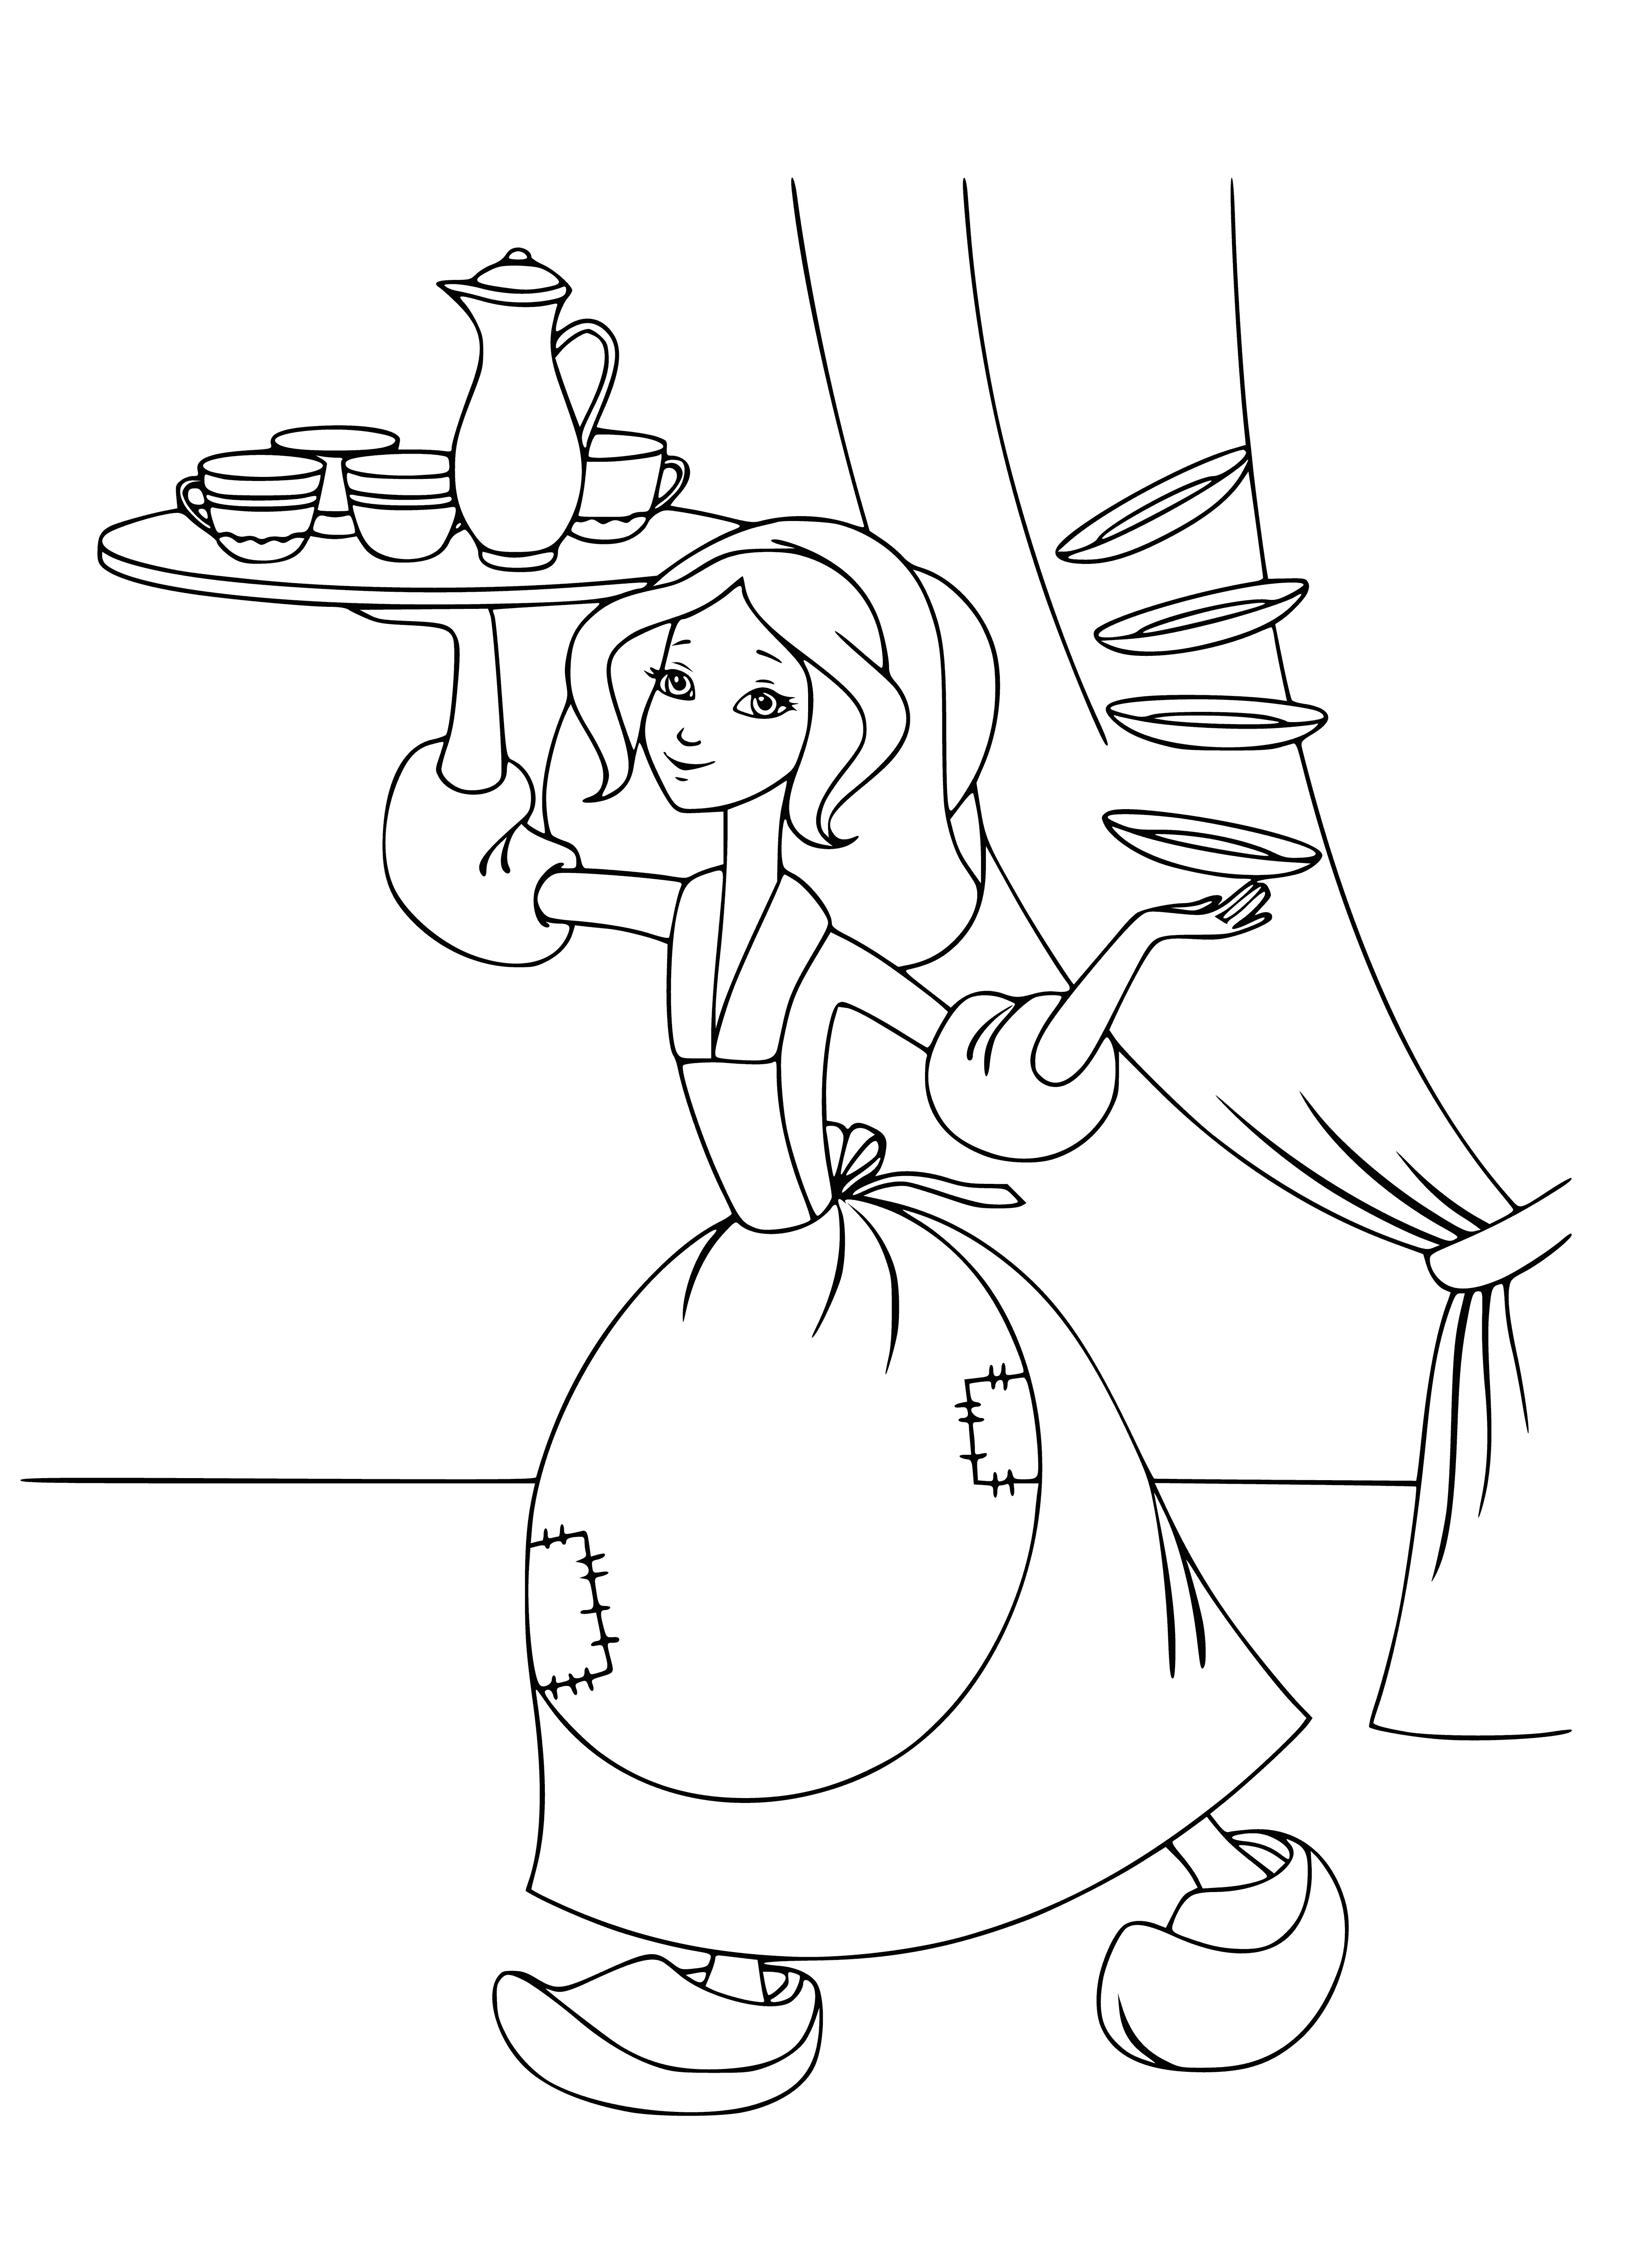 coloring page: Cinderella eats while standing at a table with 3 plates of food, a glass of water & a fork in her right hand.